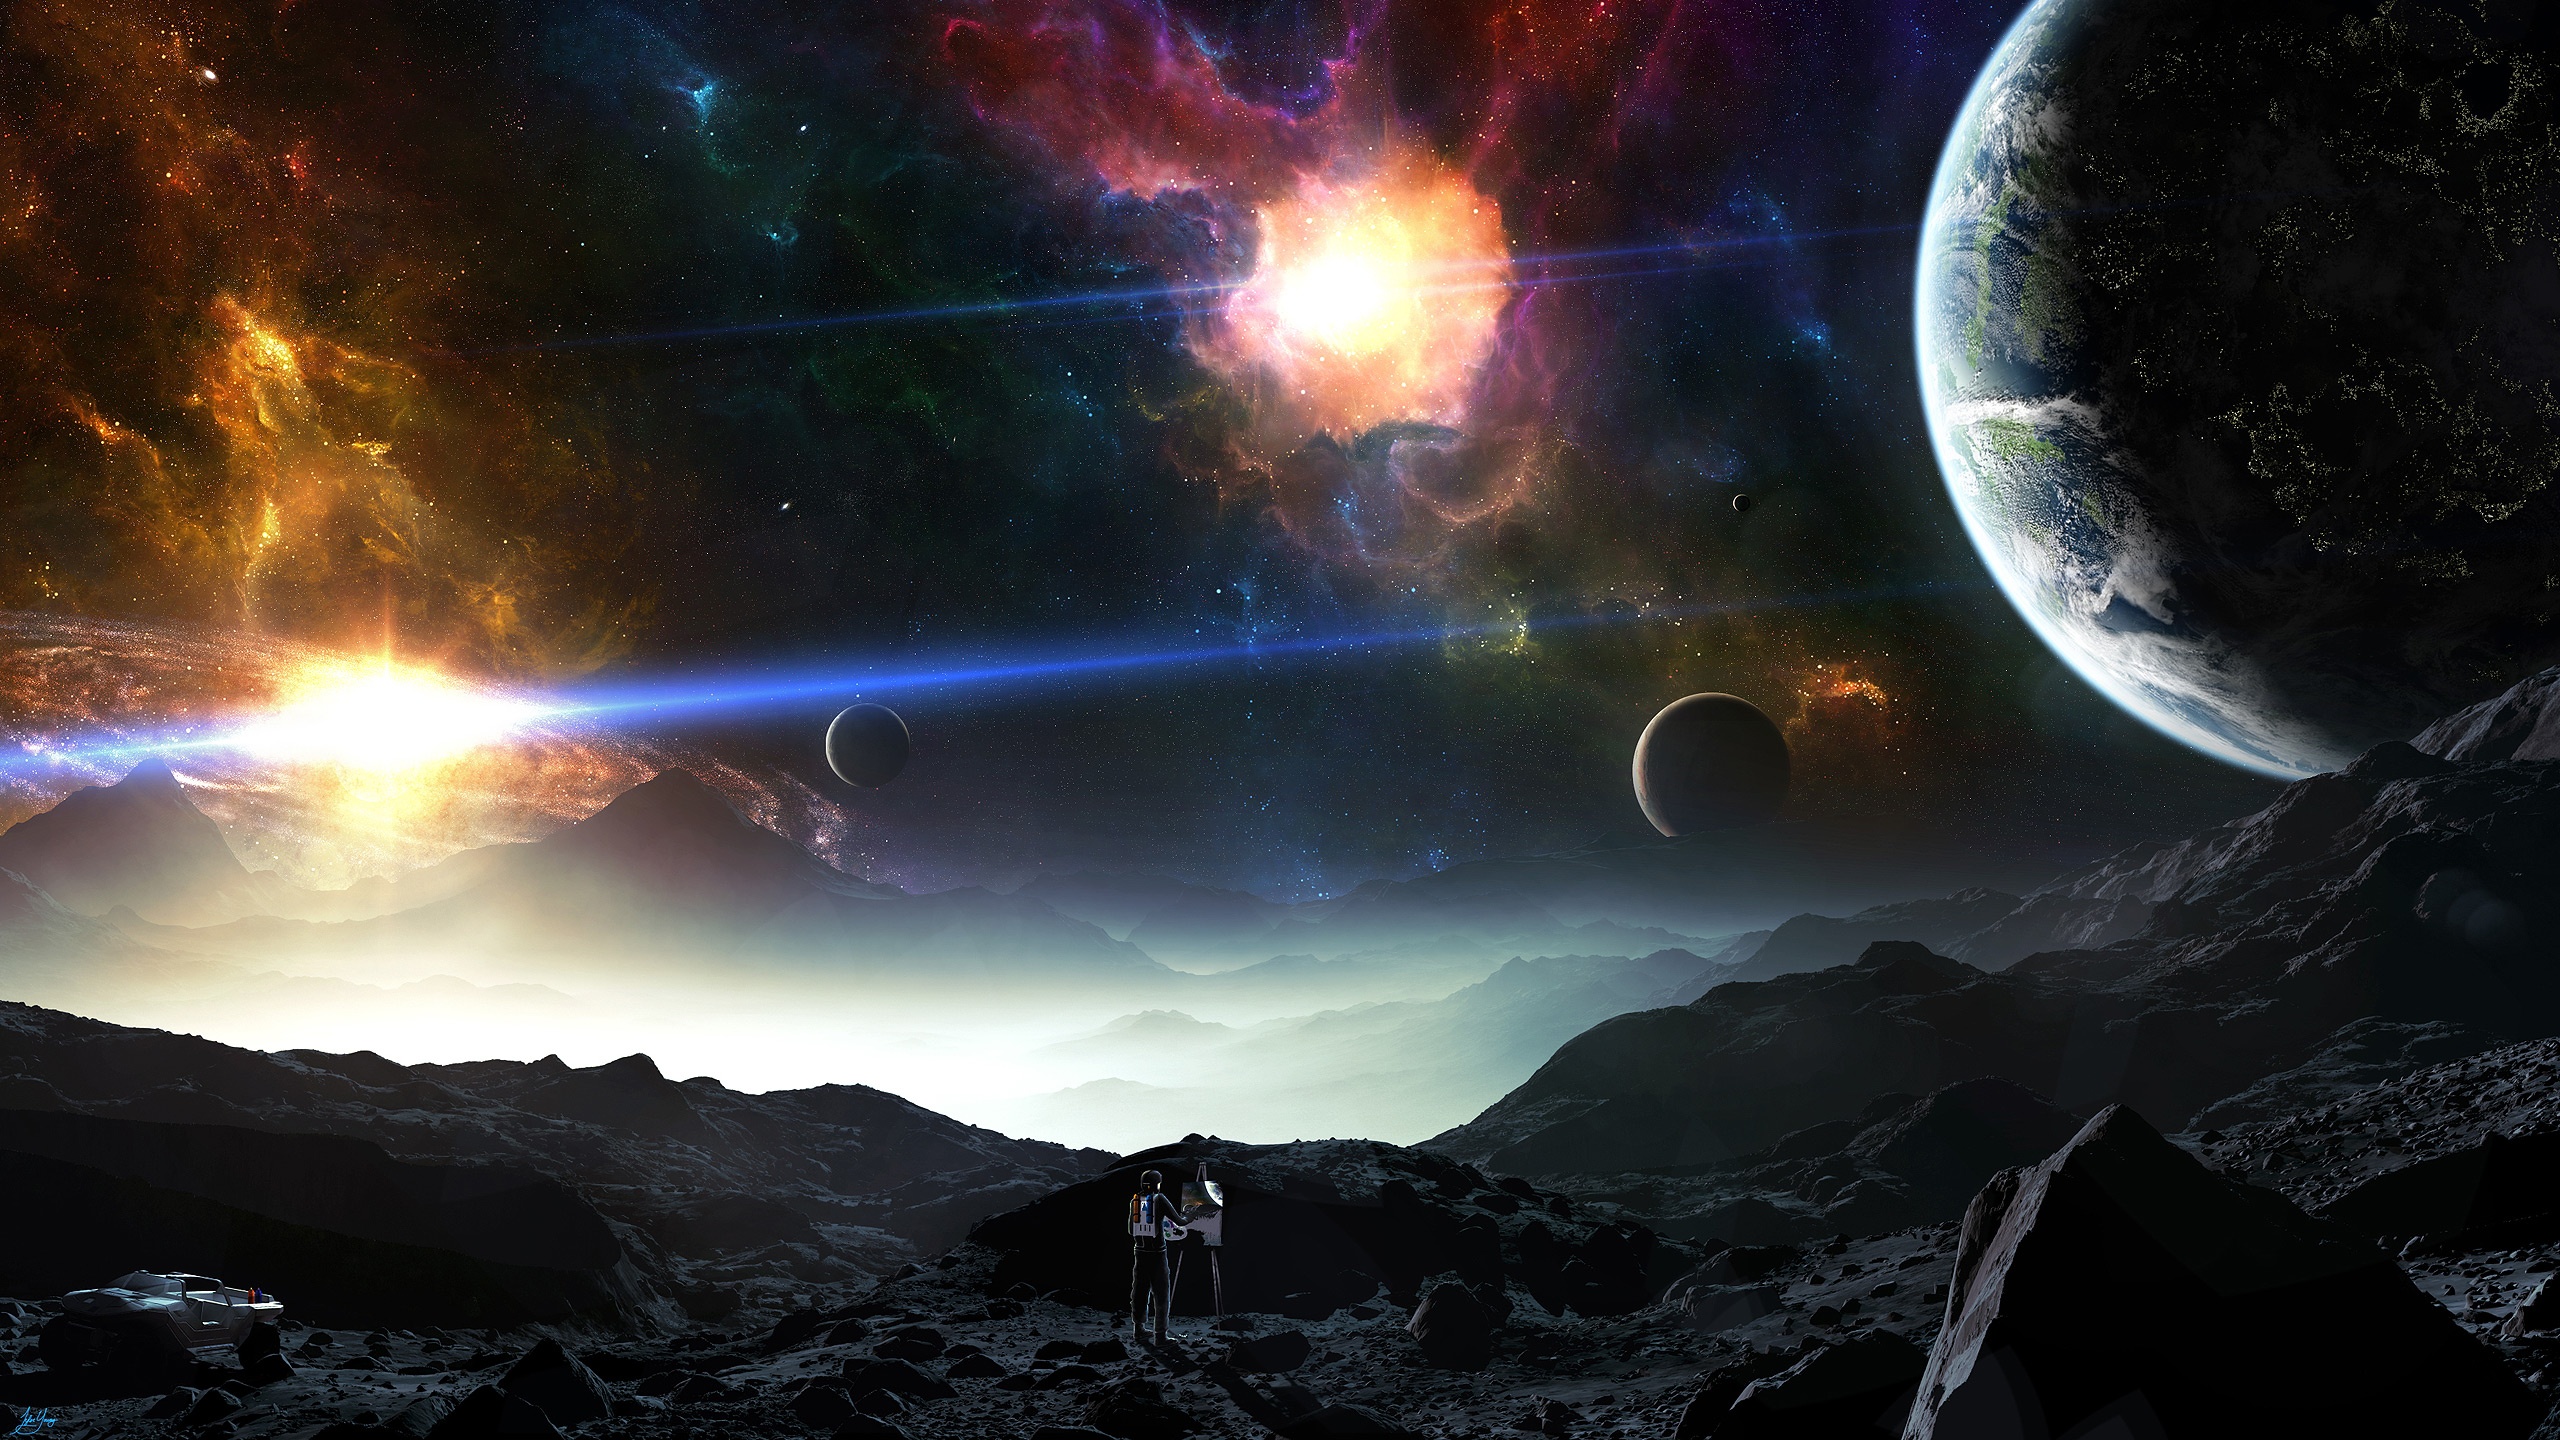 Planets In Space Wallpaper Hd : Wallpapers13.com